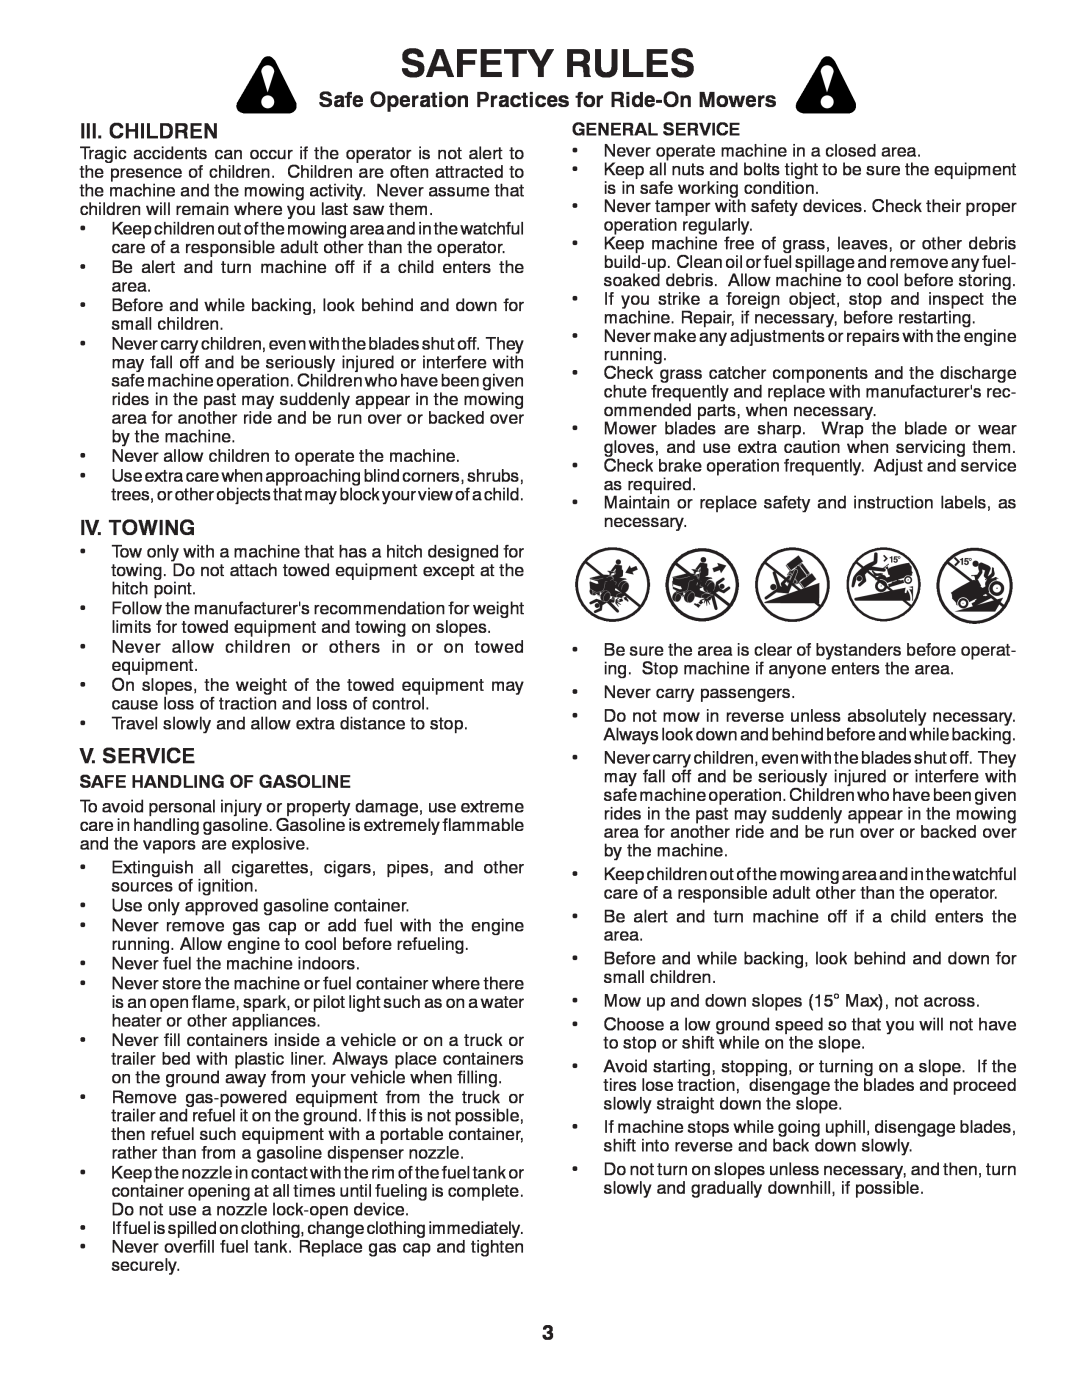 McCulloch M17538H manual Safety Rules, Safe Operation Practices for Ride-OnMowers, Iii. Children, Iv. Towing, V. Service 